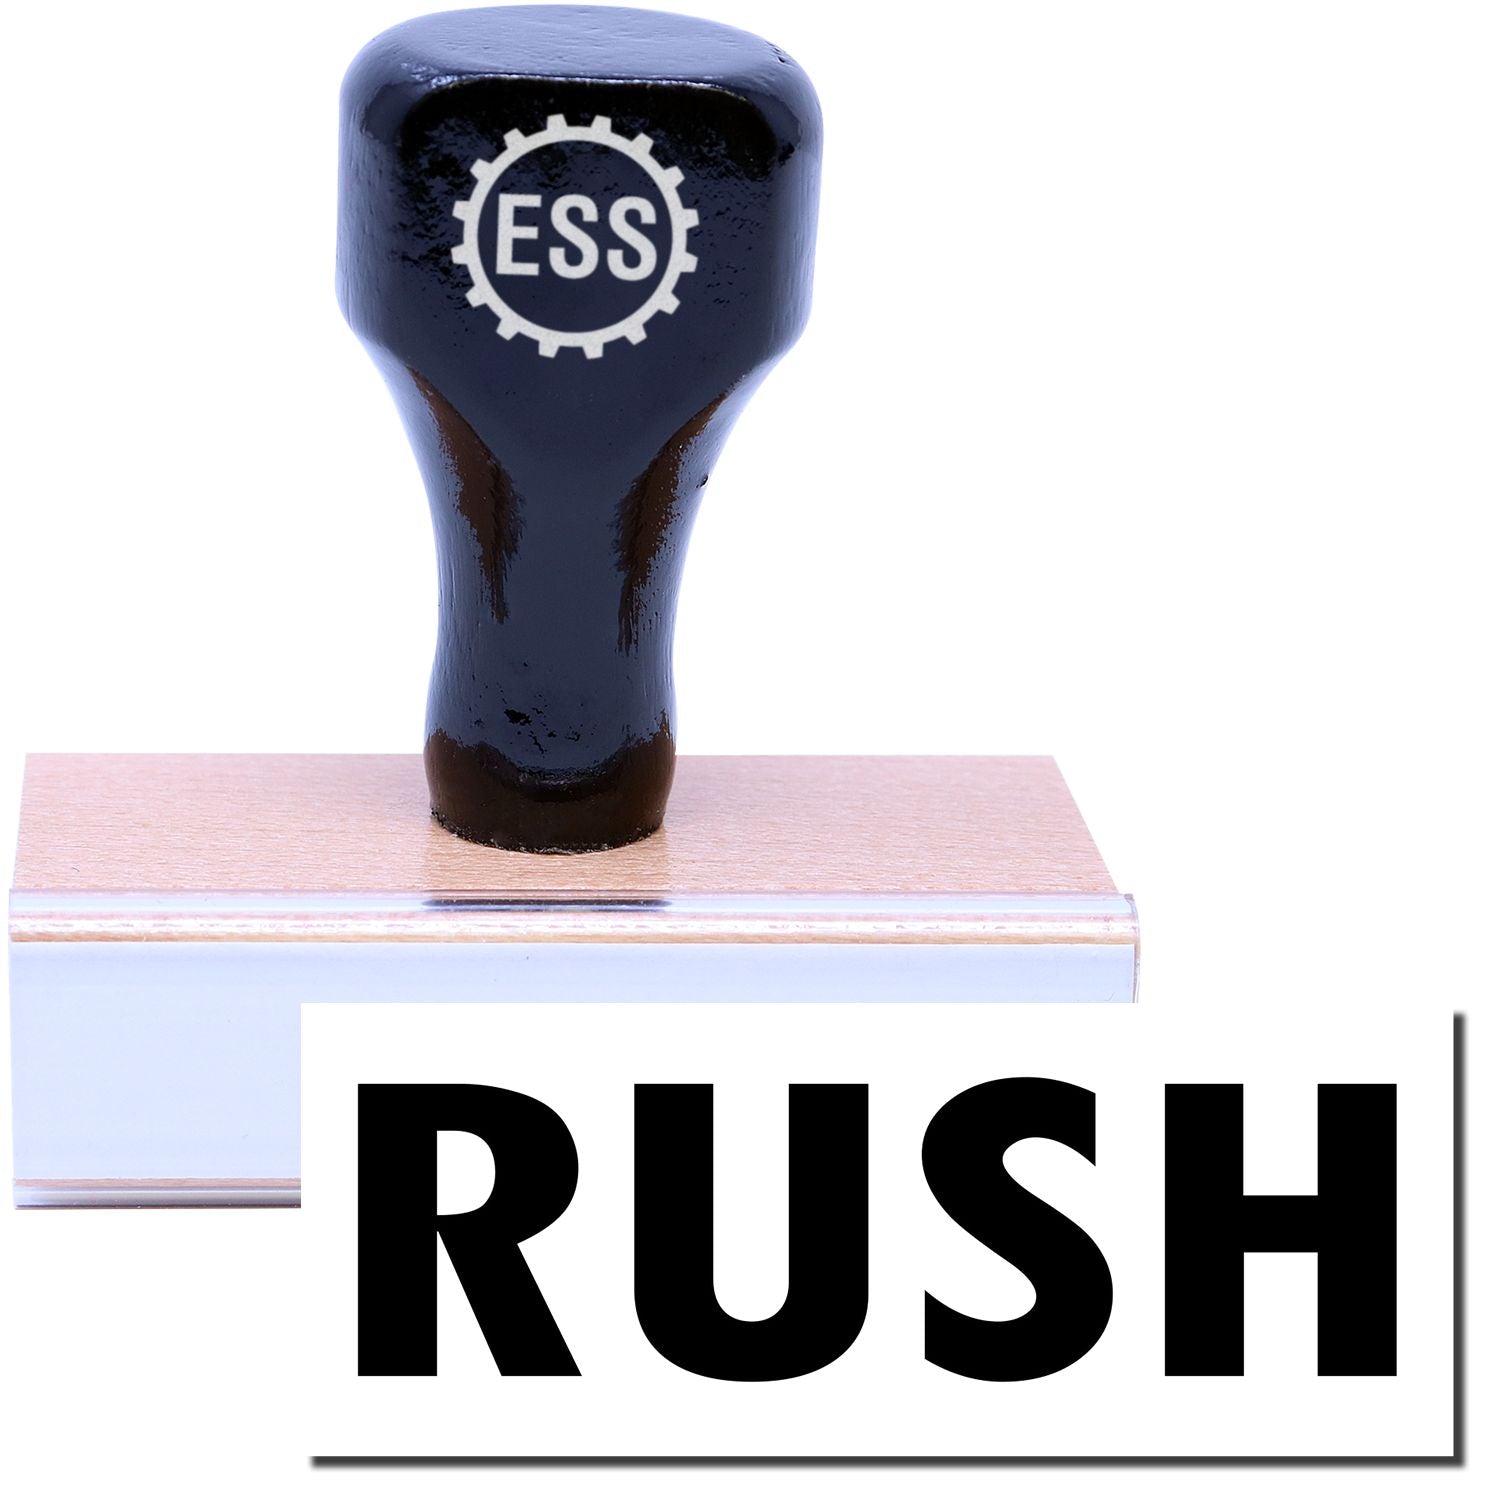 A stock office rubber stamp with a stamped image showing how the text "RUSH" in a large font is displayed after stamping.